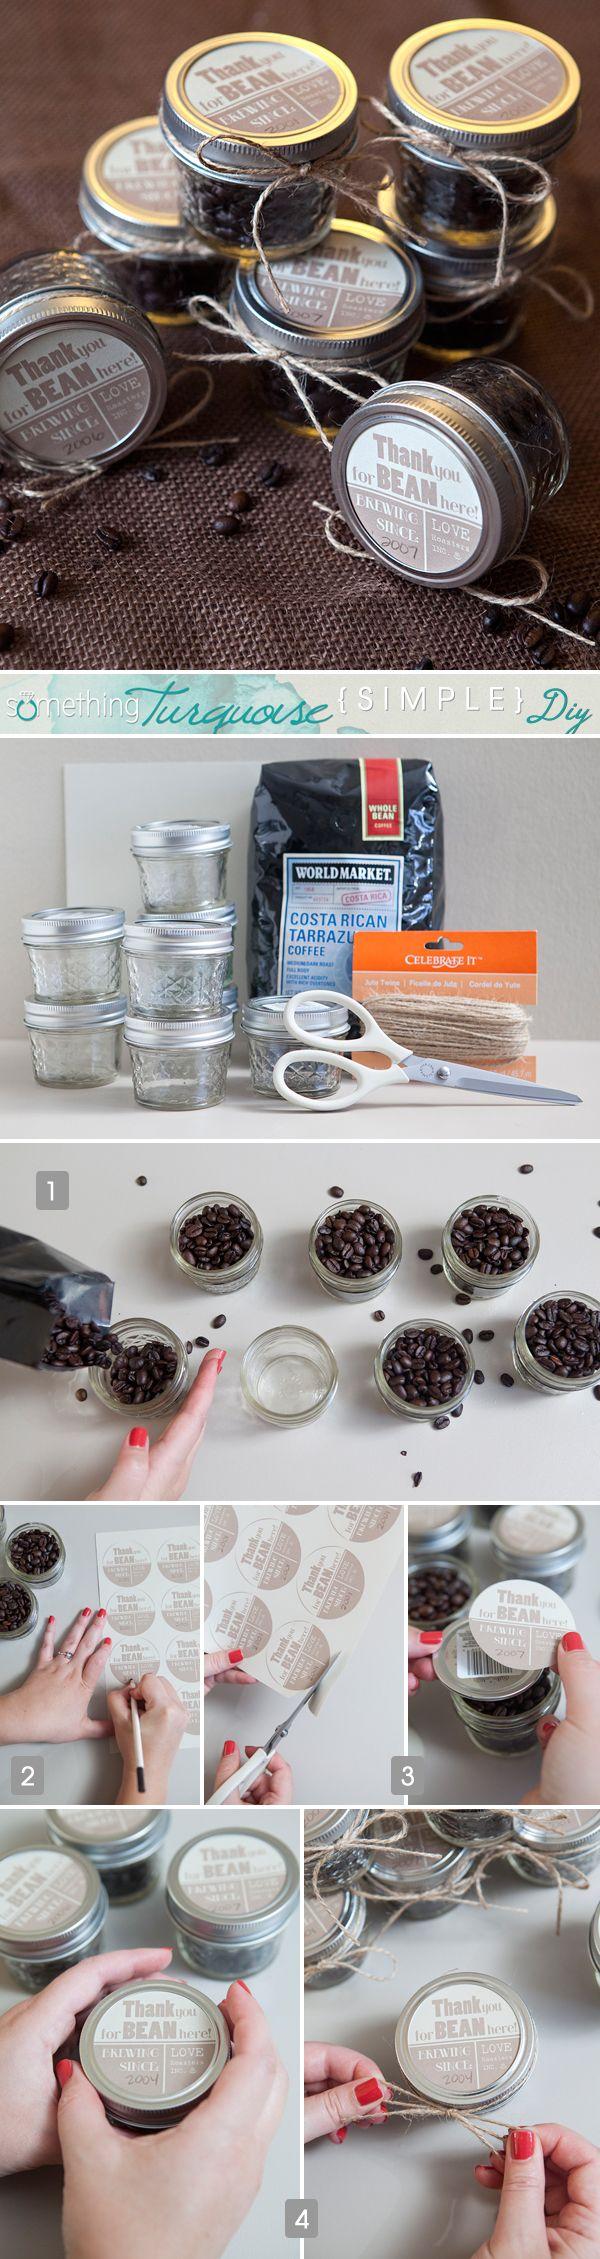 Mariage - Check Out These Adorable Coffee Bean Wedding Favors In Mason Jars!